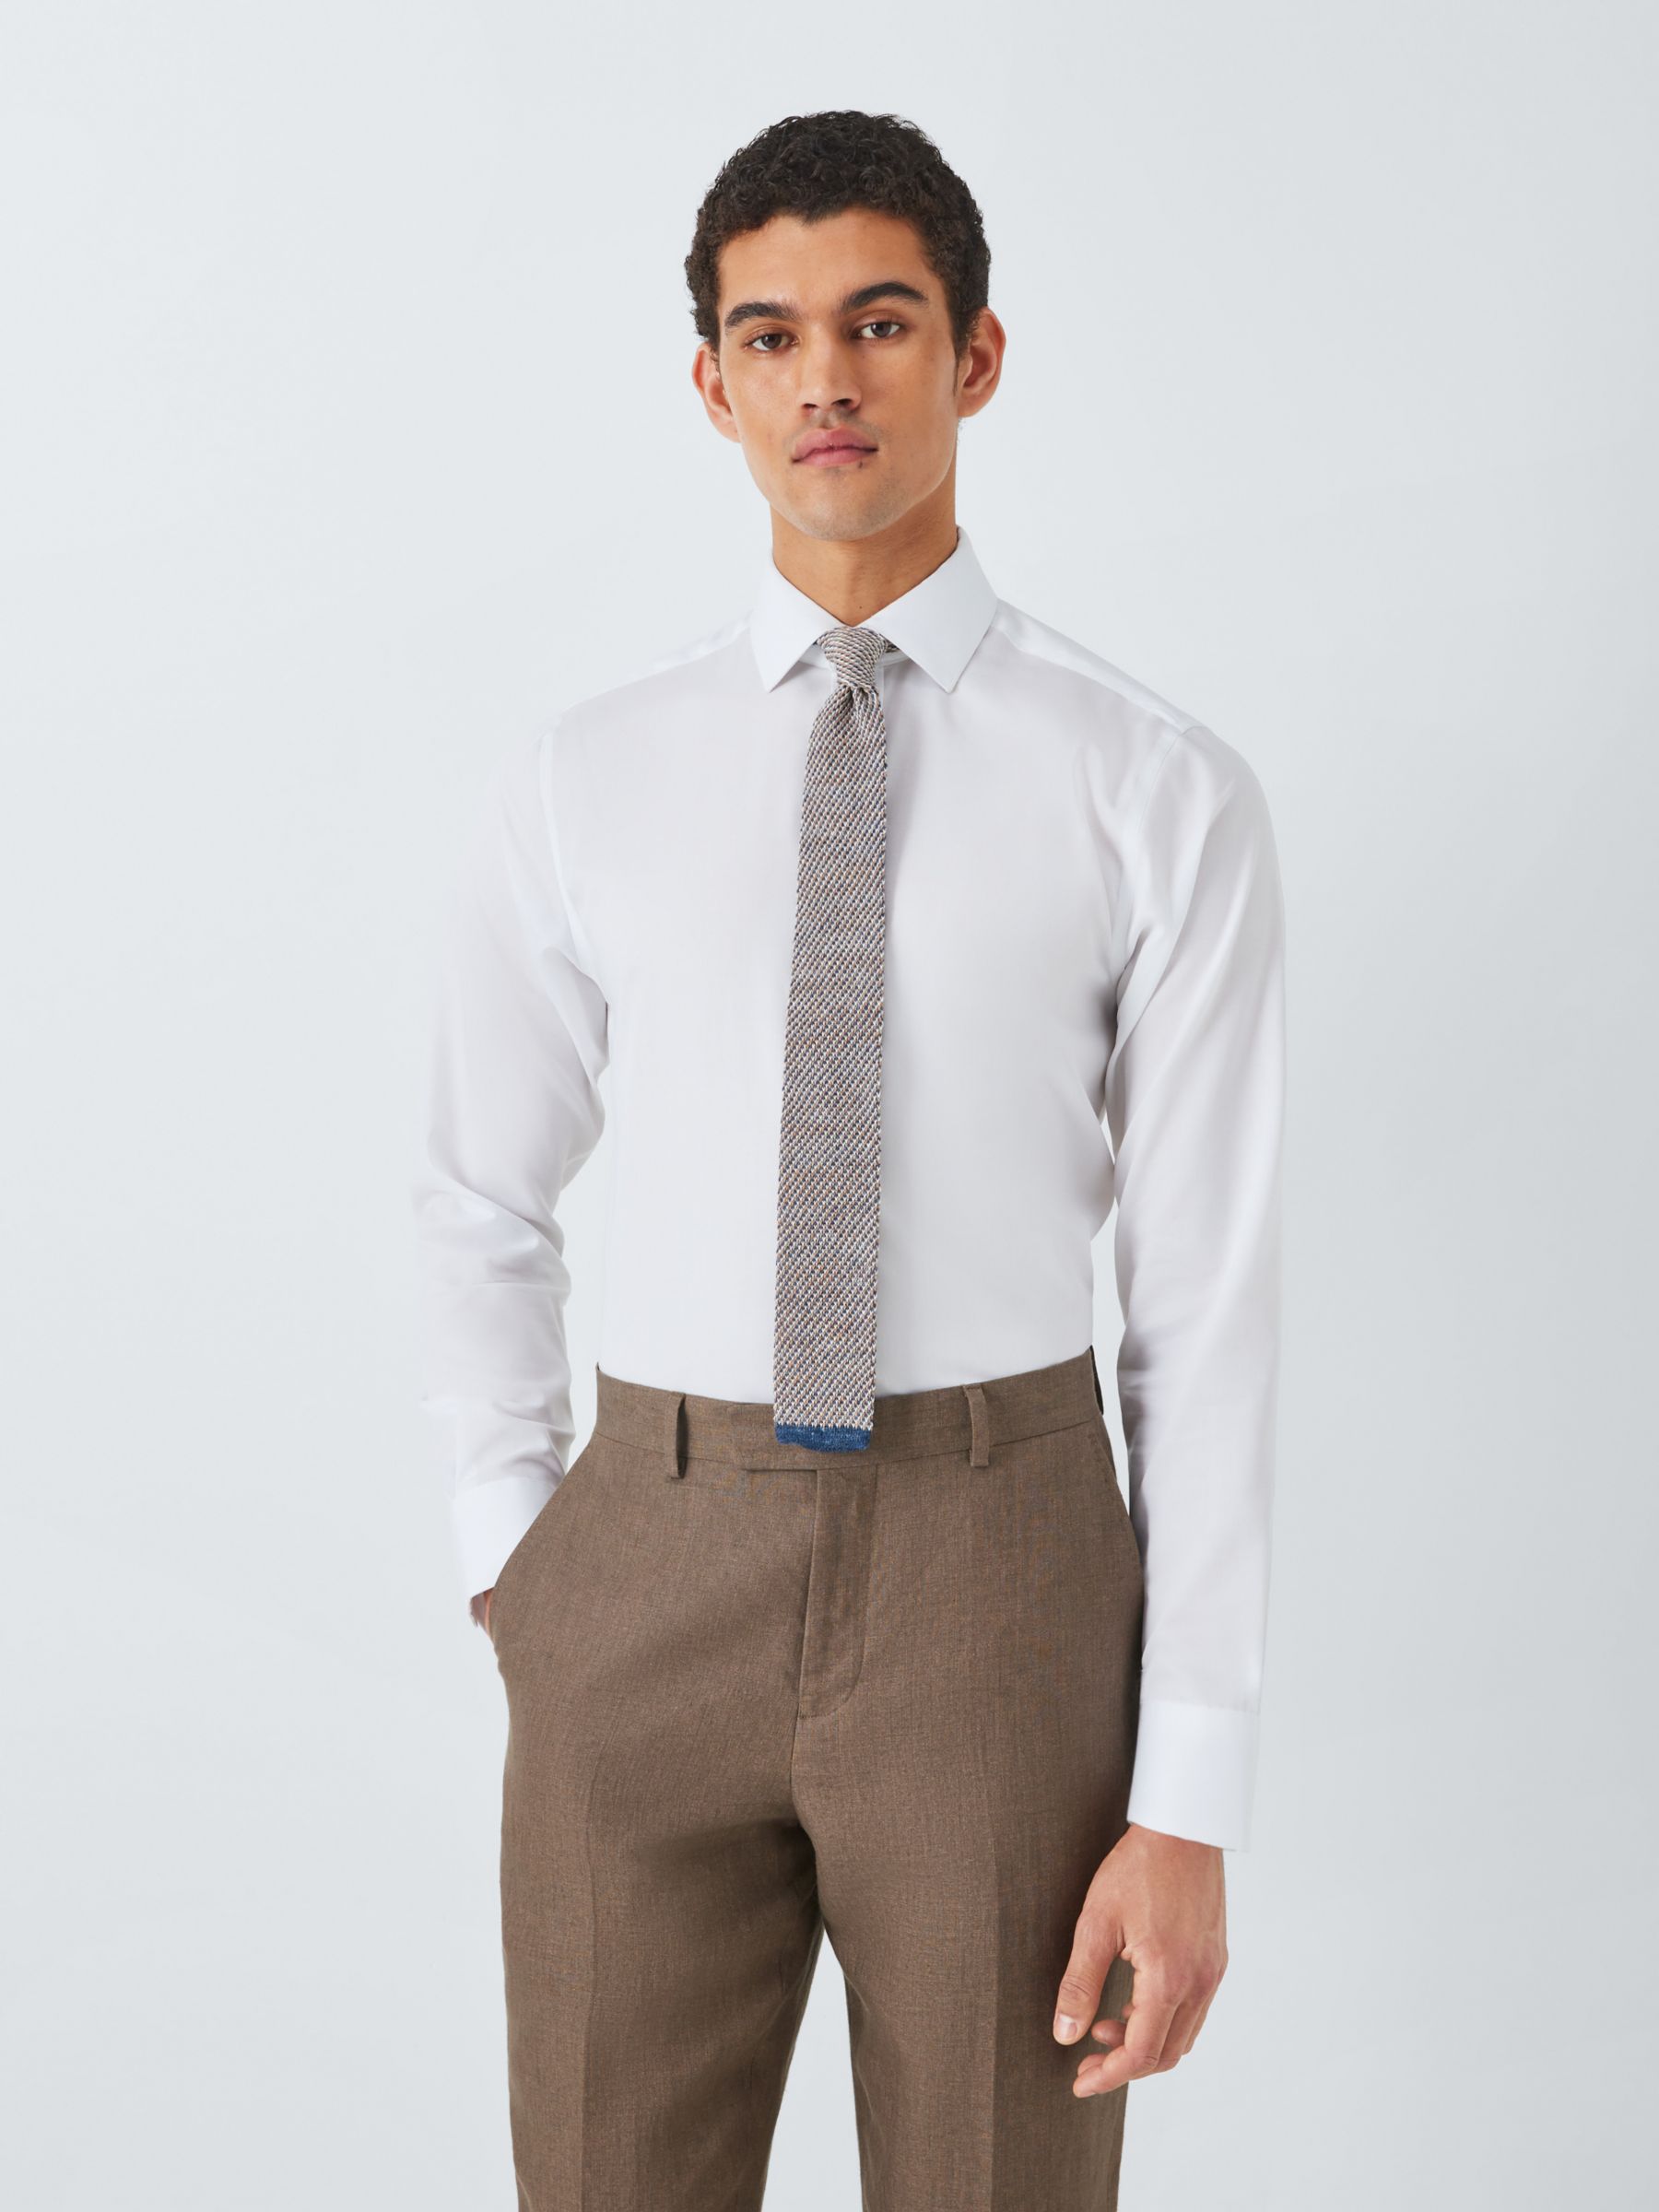 Buy John Lewis Knitted Linen Tie, Airforce Blue/Neutral Online at johnlewis.com